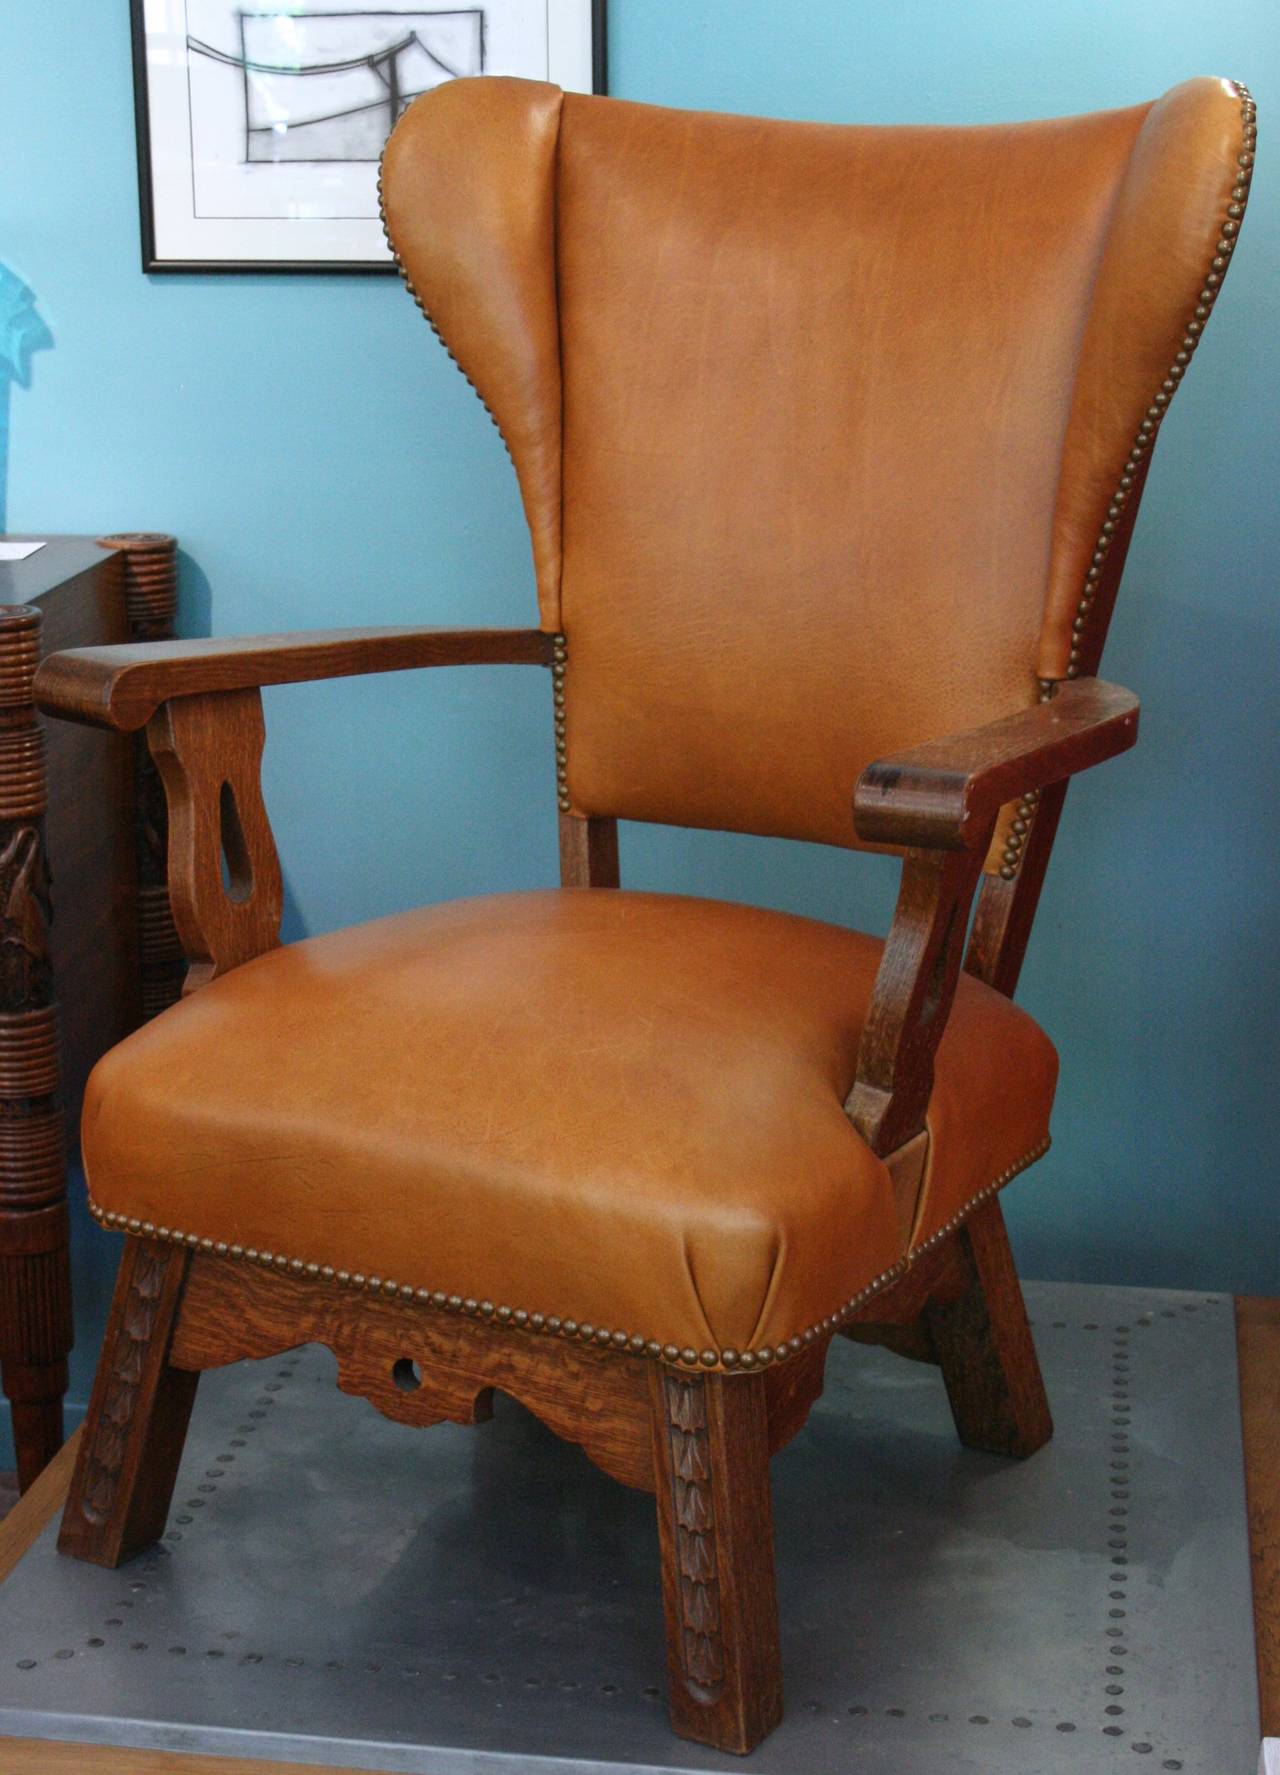 Unusual wing chair with carved detail on front, and drama on the back. Lovely  original condition.
Avantgarden Ltd. cultivates unexpected and exceptional lighting, furniture and design.  To view items in person please visit our showroom in Pound